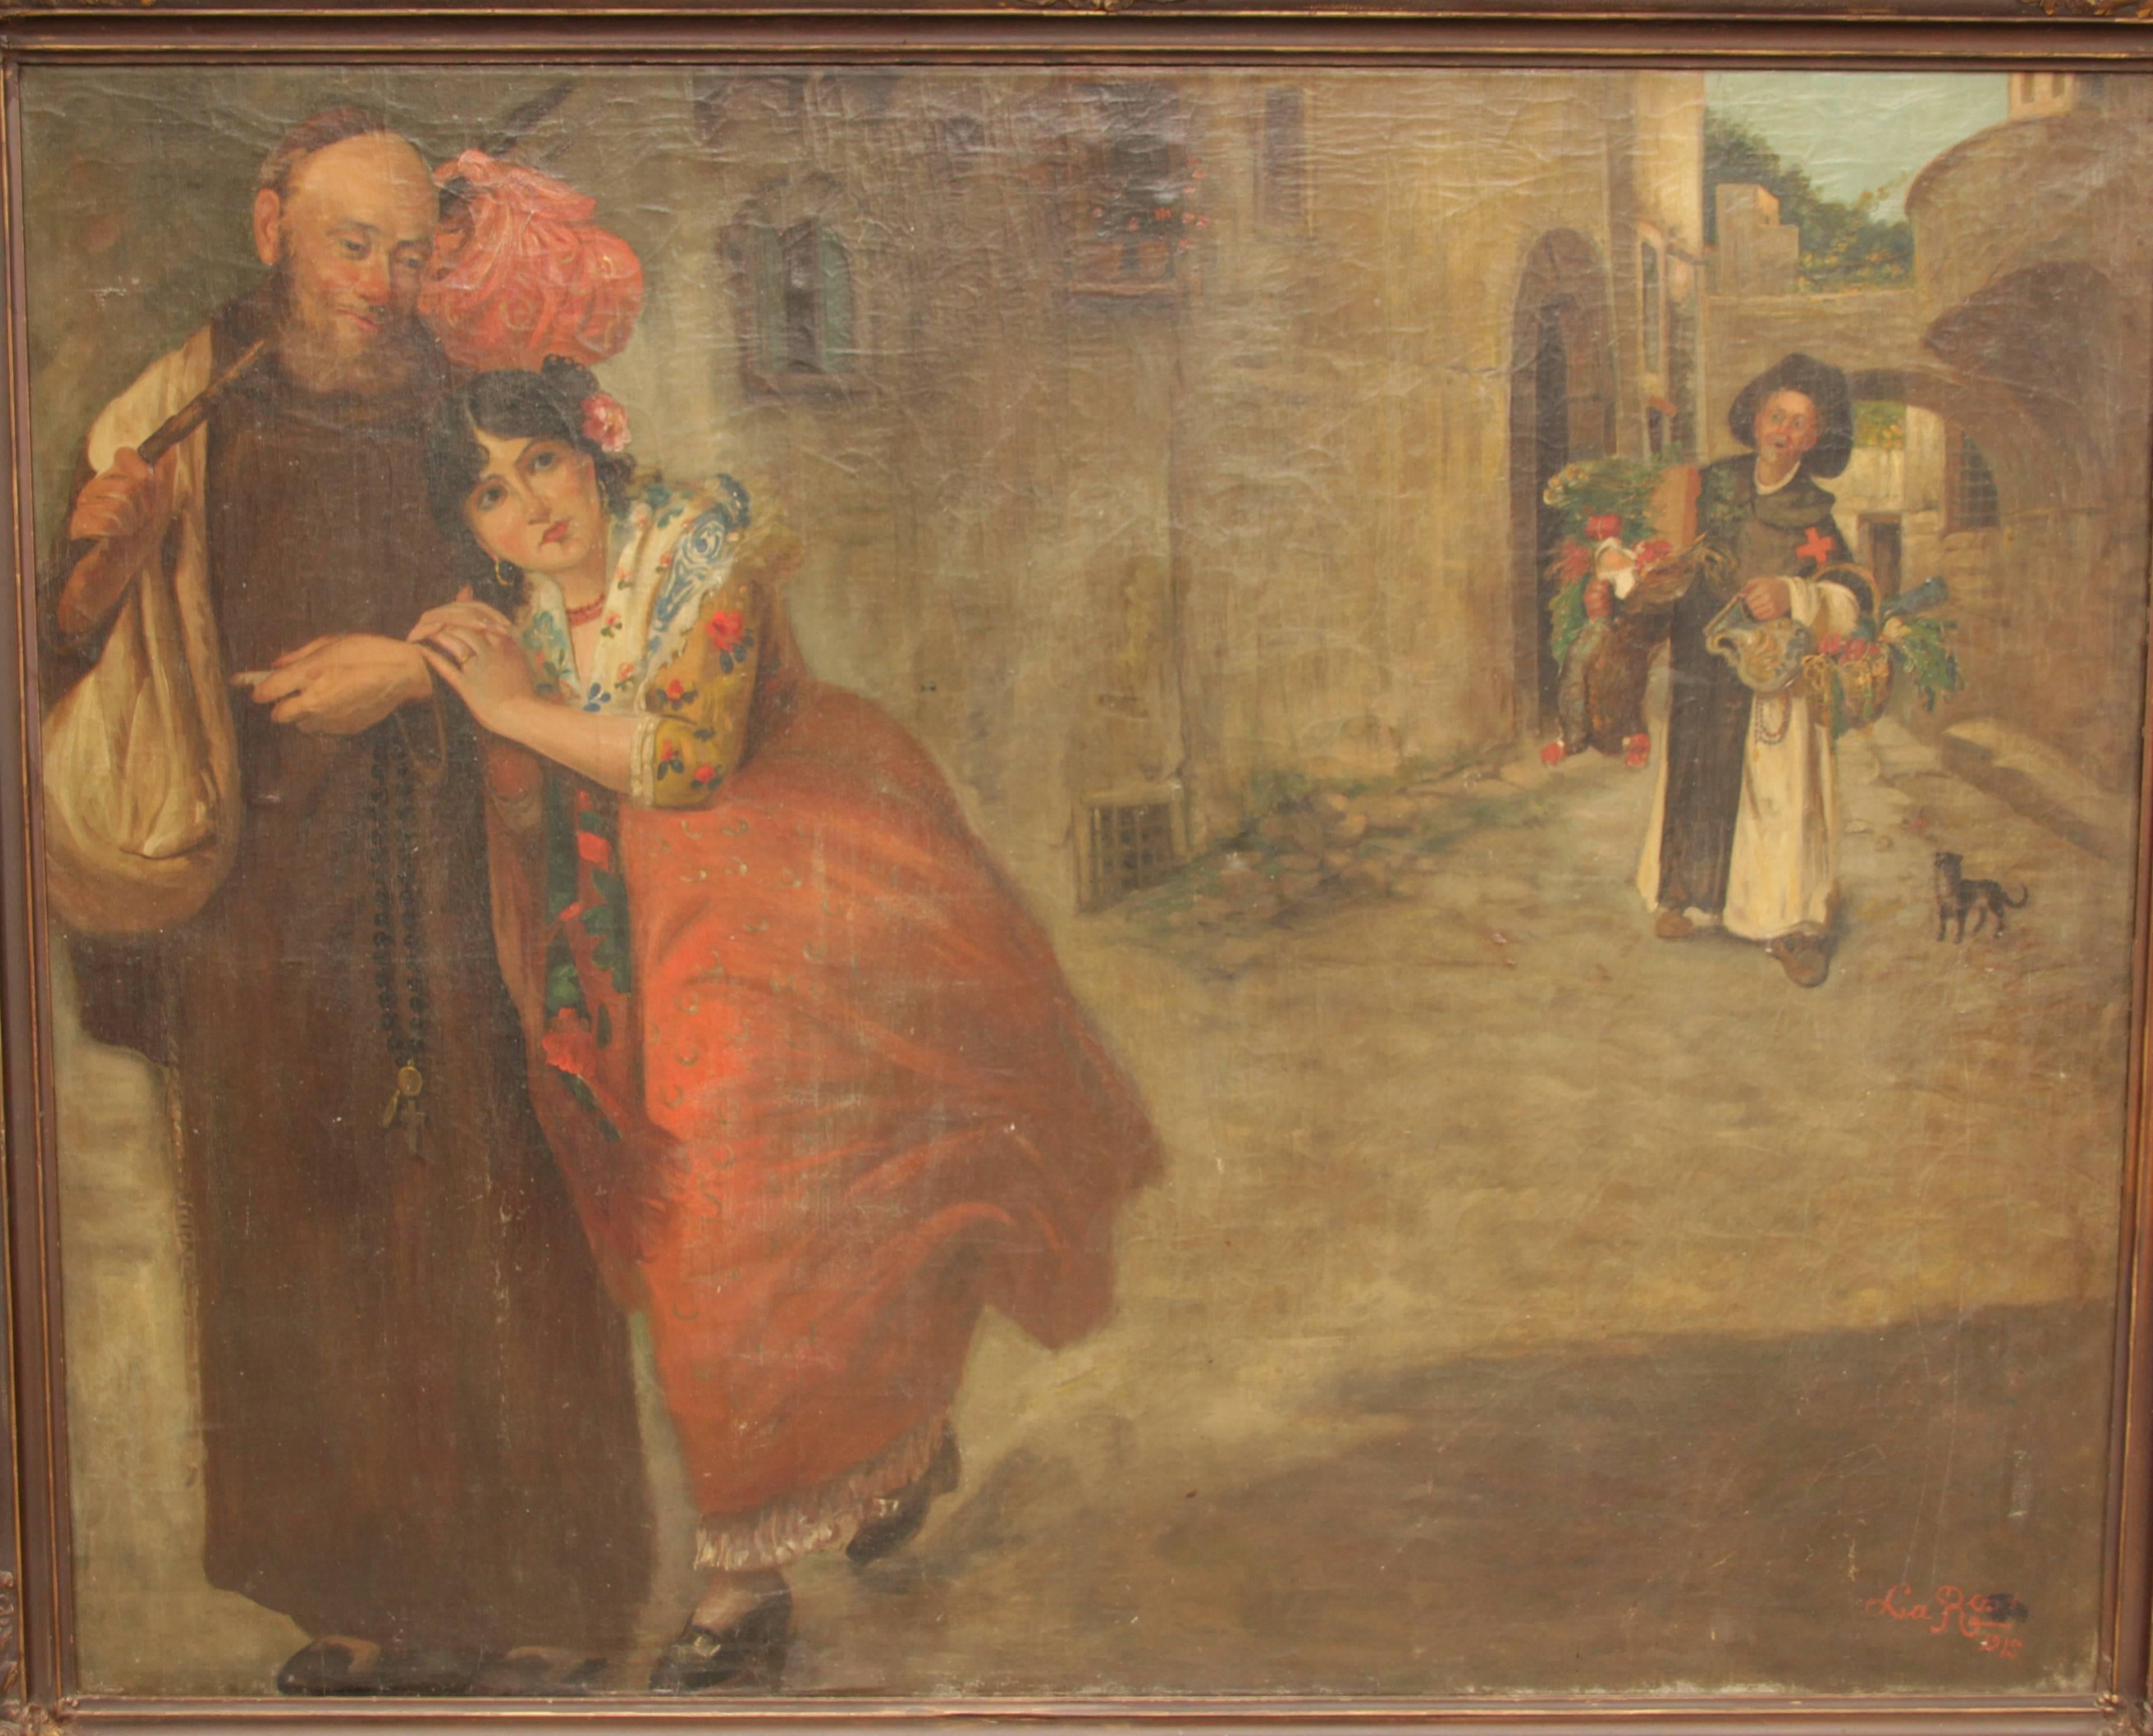 Painting of lovely maiden in a colorful dress signed La Rosa, 1915, circa 1910.